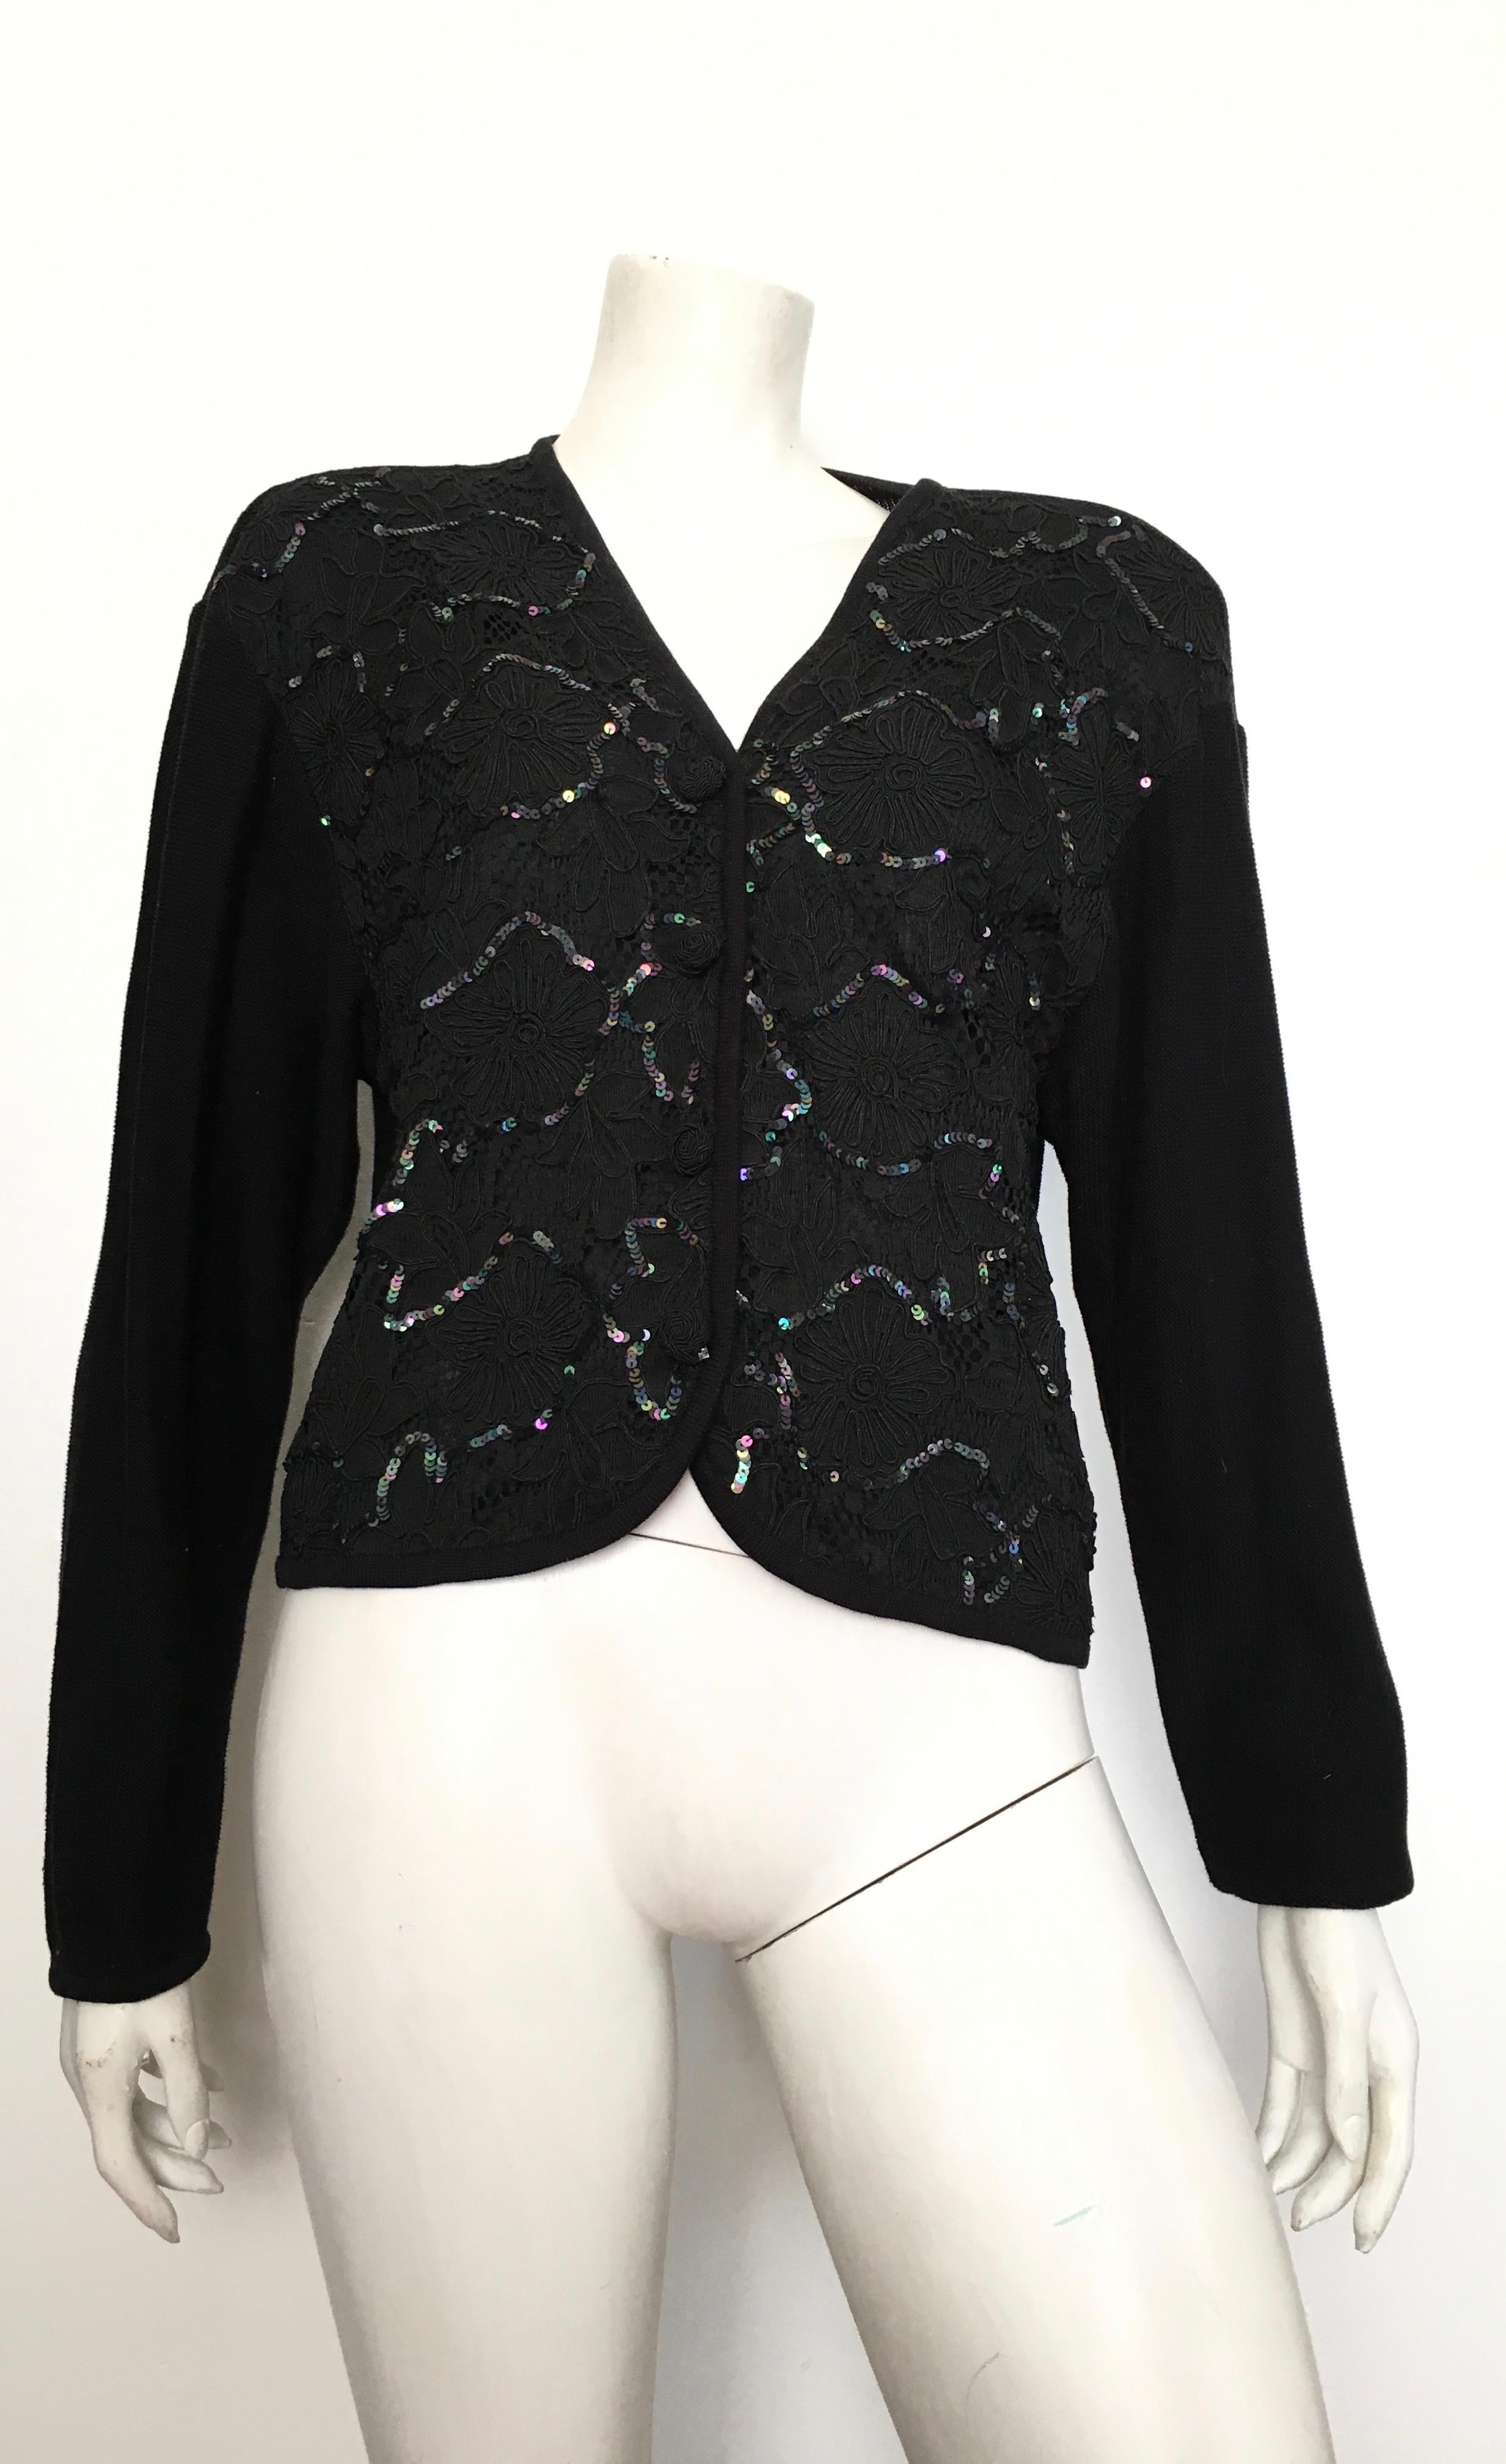 Emanuel Ungaro ter 1990s black knit with sequins cardigan is a size large. Cardigan has shoulder pads that can be removed if so desired.  This is a gorgeous cardigan fit for any evening occasion. Cardigan is not lined.
Measurements are:
46